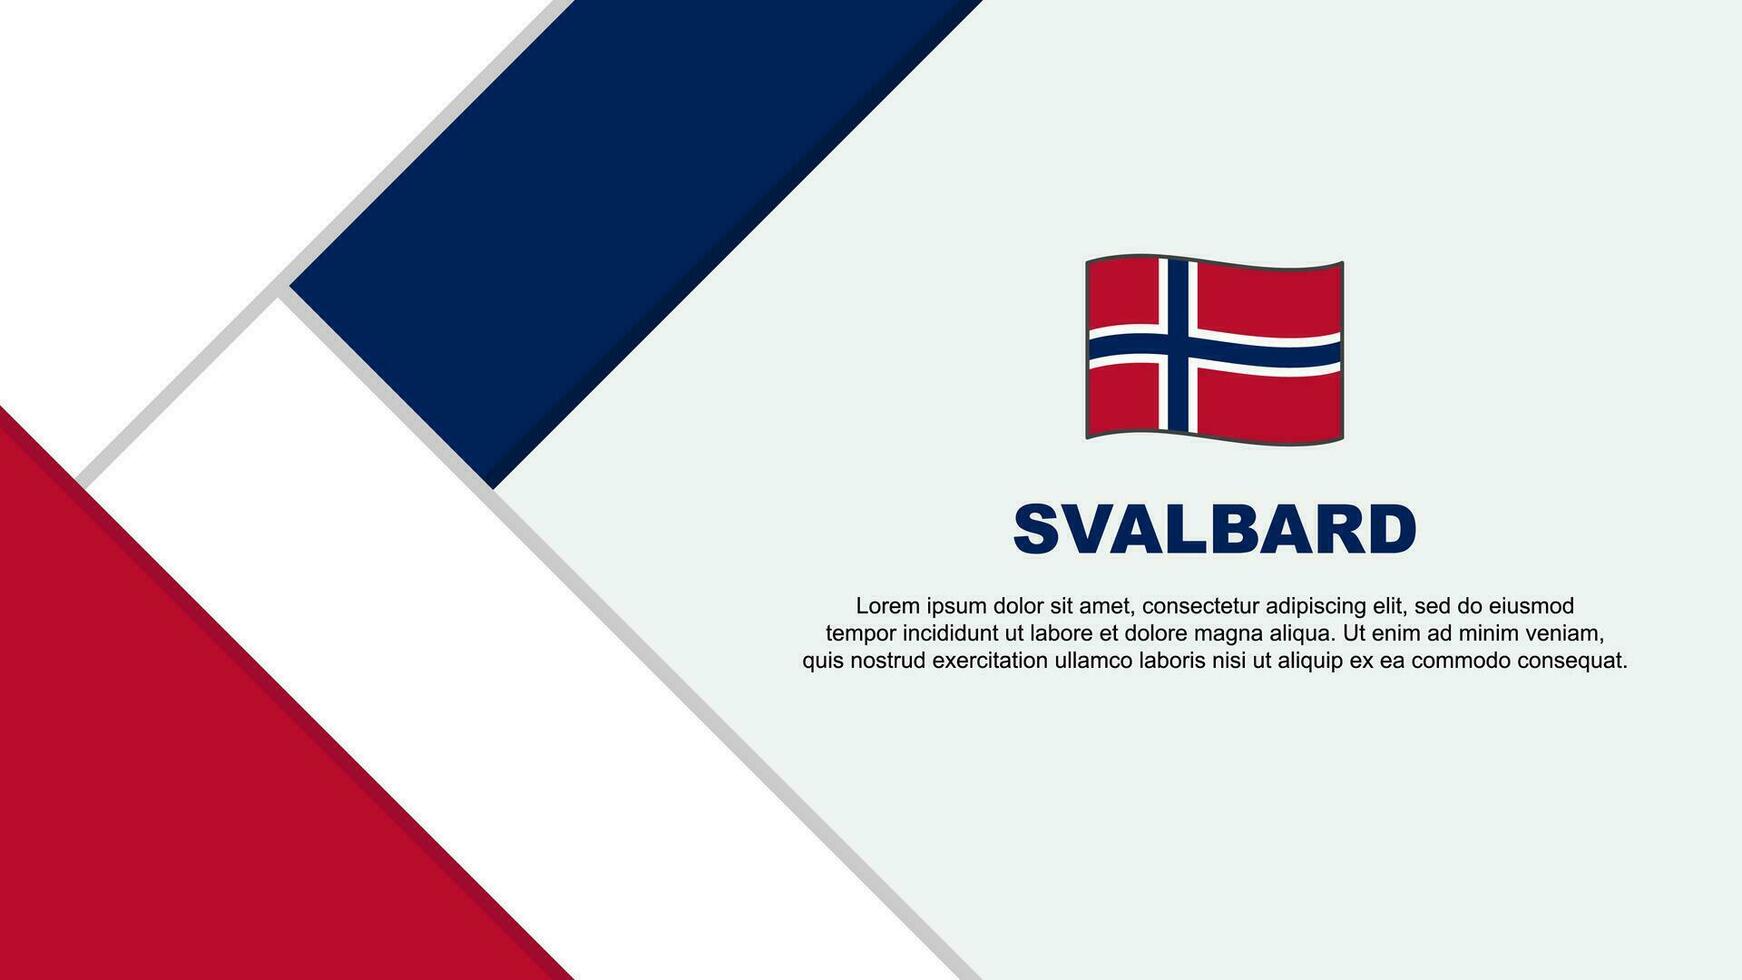 Svalbard Flag Abstract Background Design Template. Svalbard Independence Day Banner Cartoon Vector Illustration. Svalbard Illustration